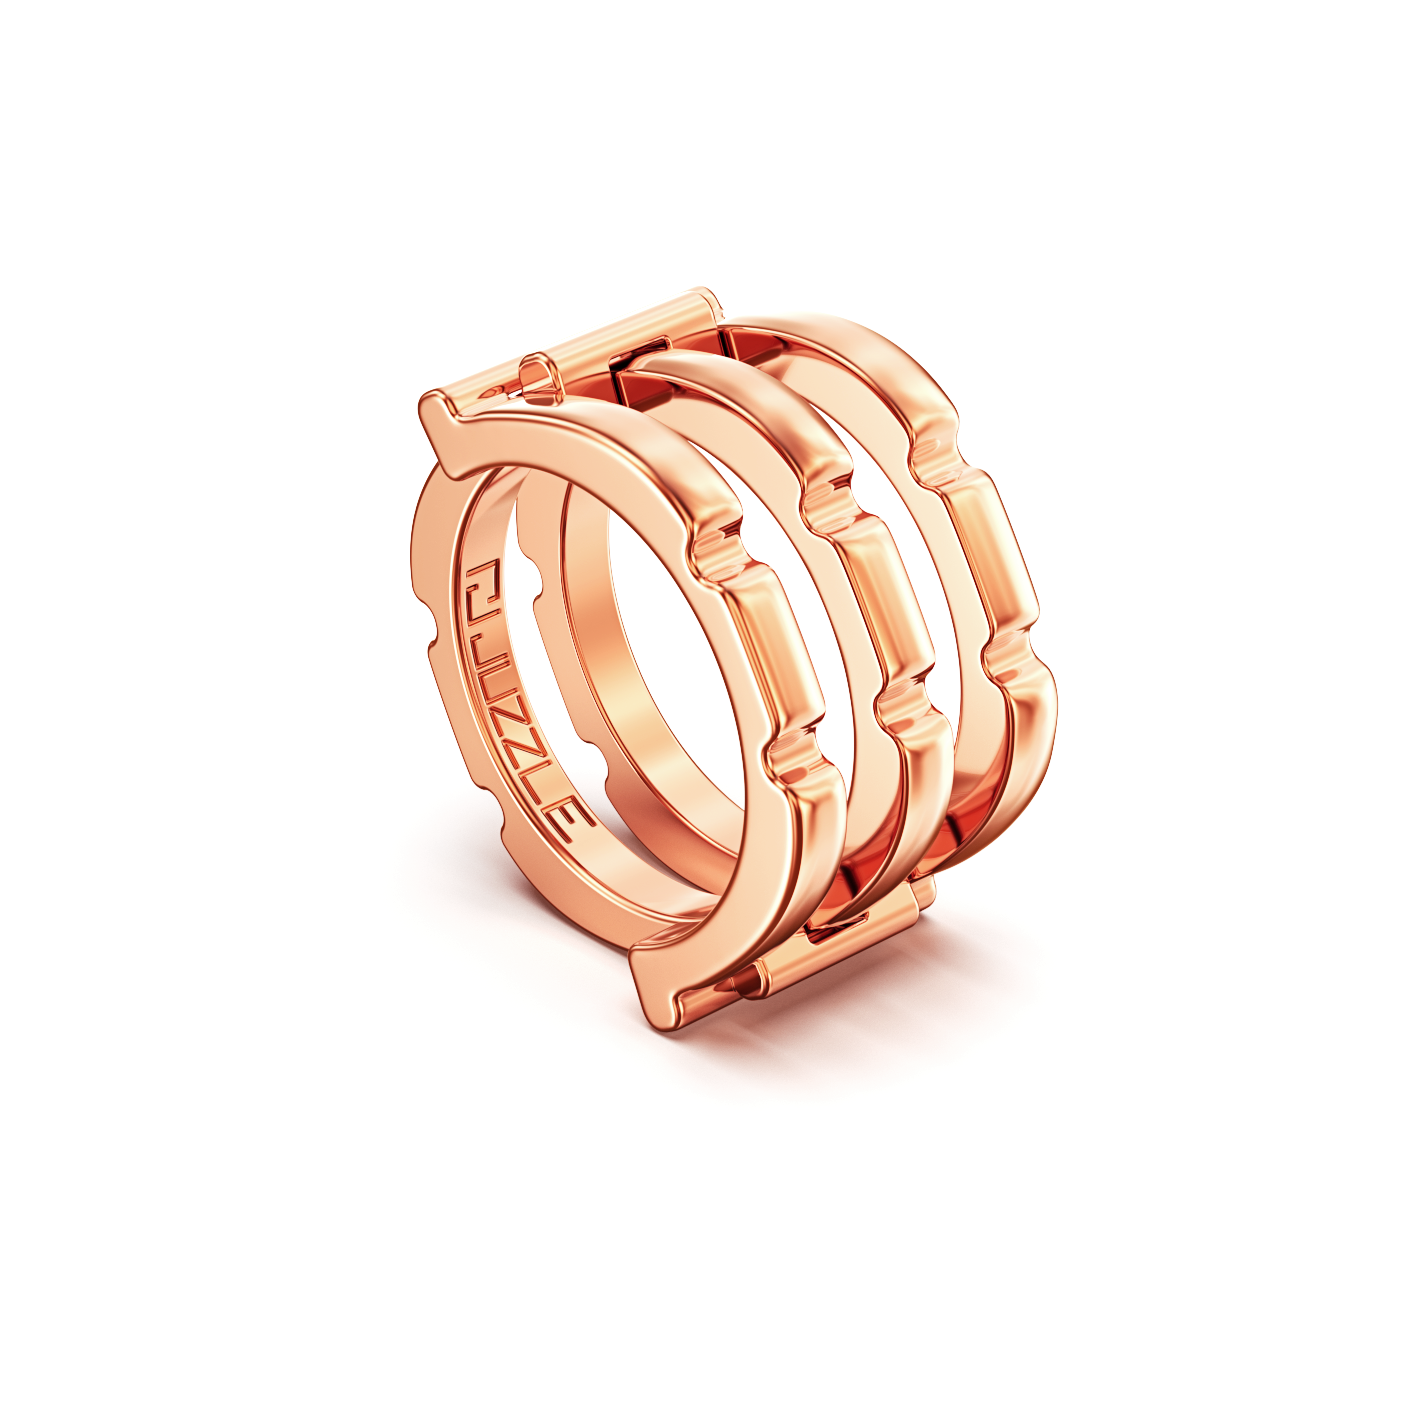 ROSE GOLD 14K  puzzle ring